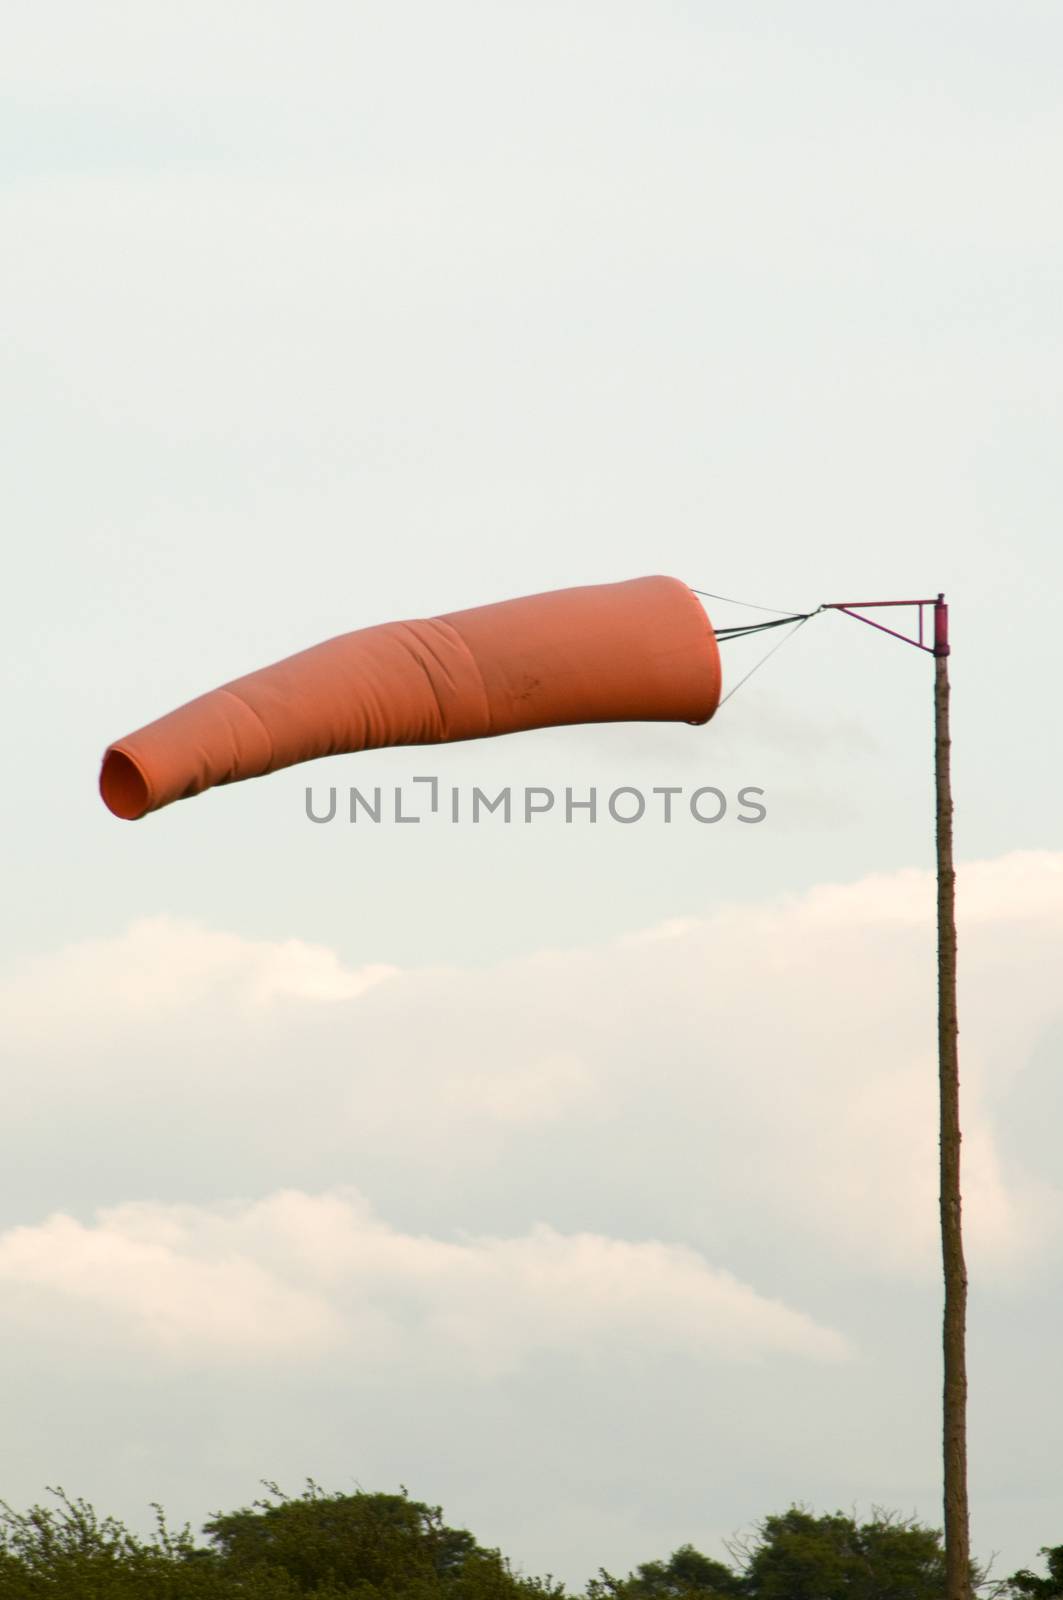 A windsock at an airfield